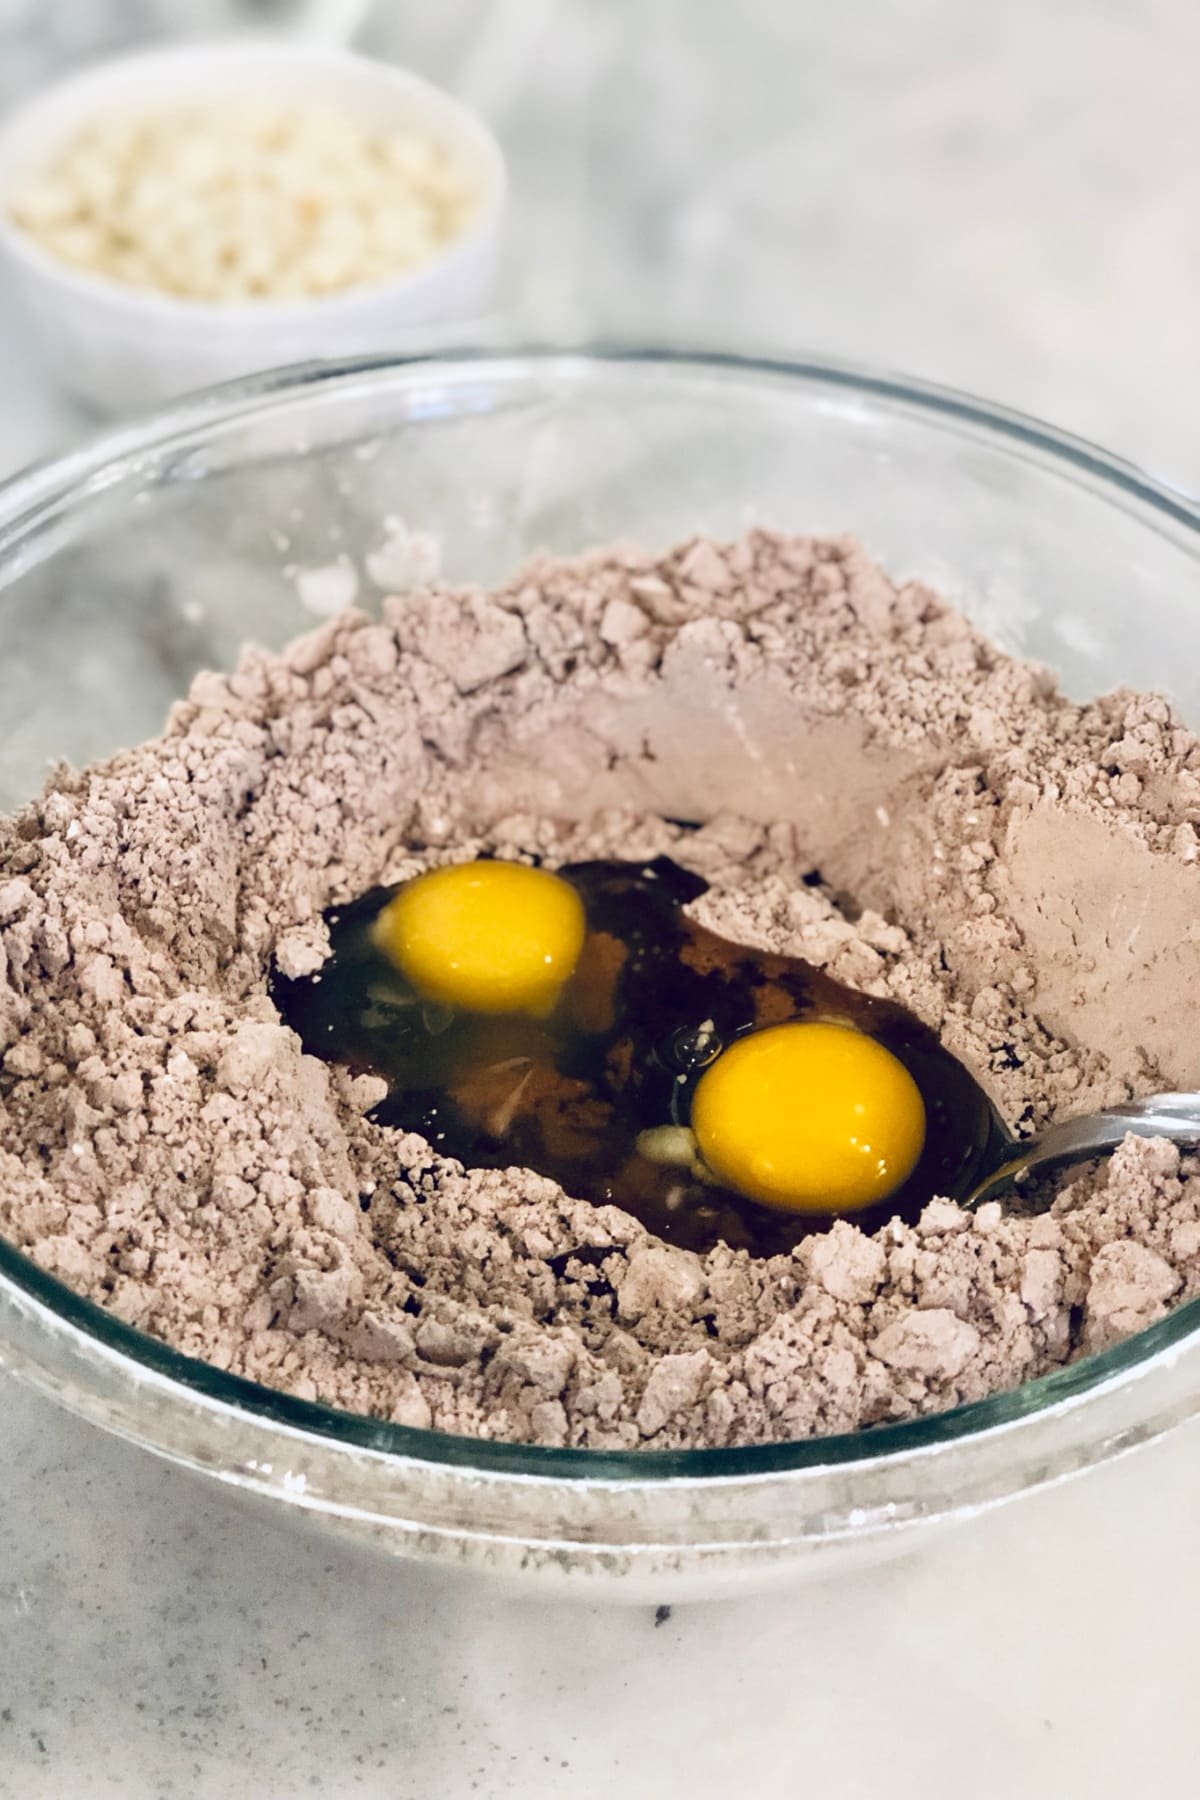 Eggs mixed with brownie mix, vegetable oil and flour